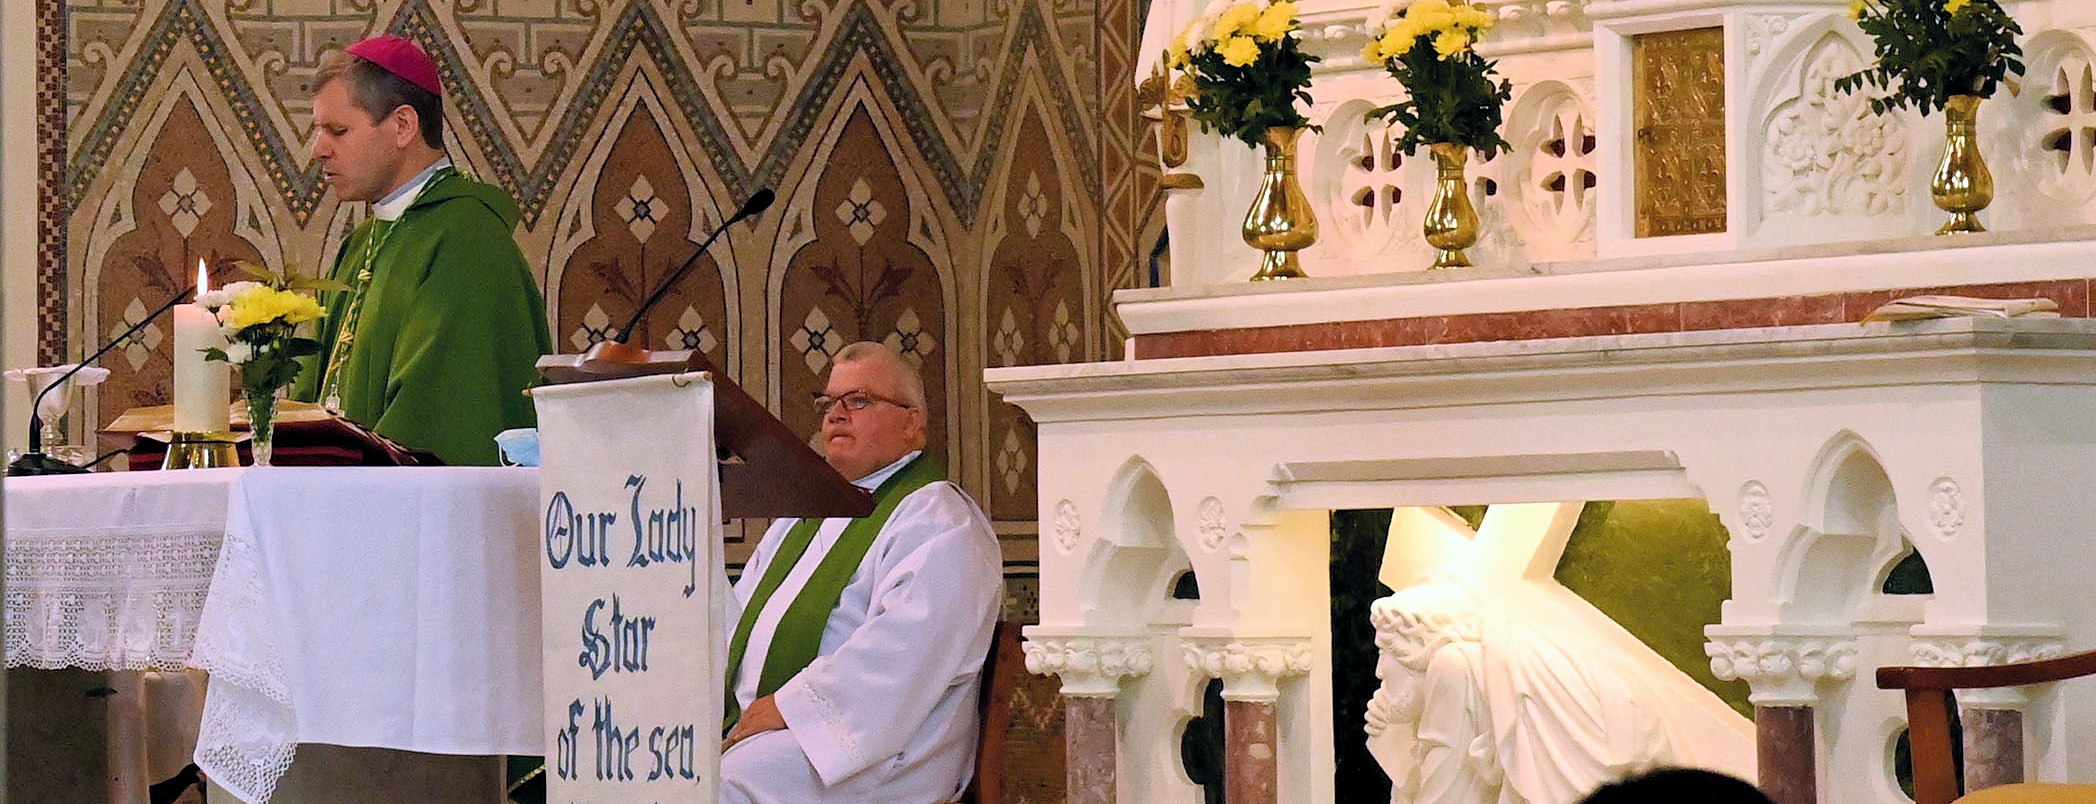 Bishop Fintan reminded us that Jesus calls us to forgive countless times